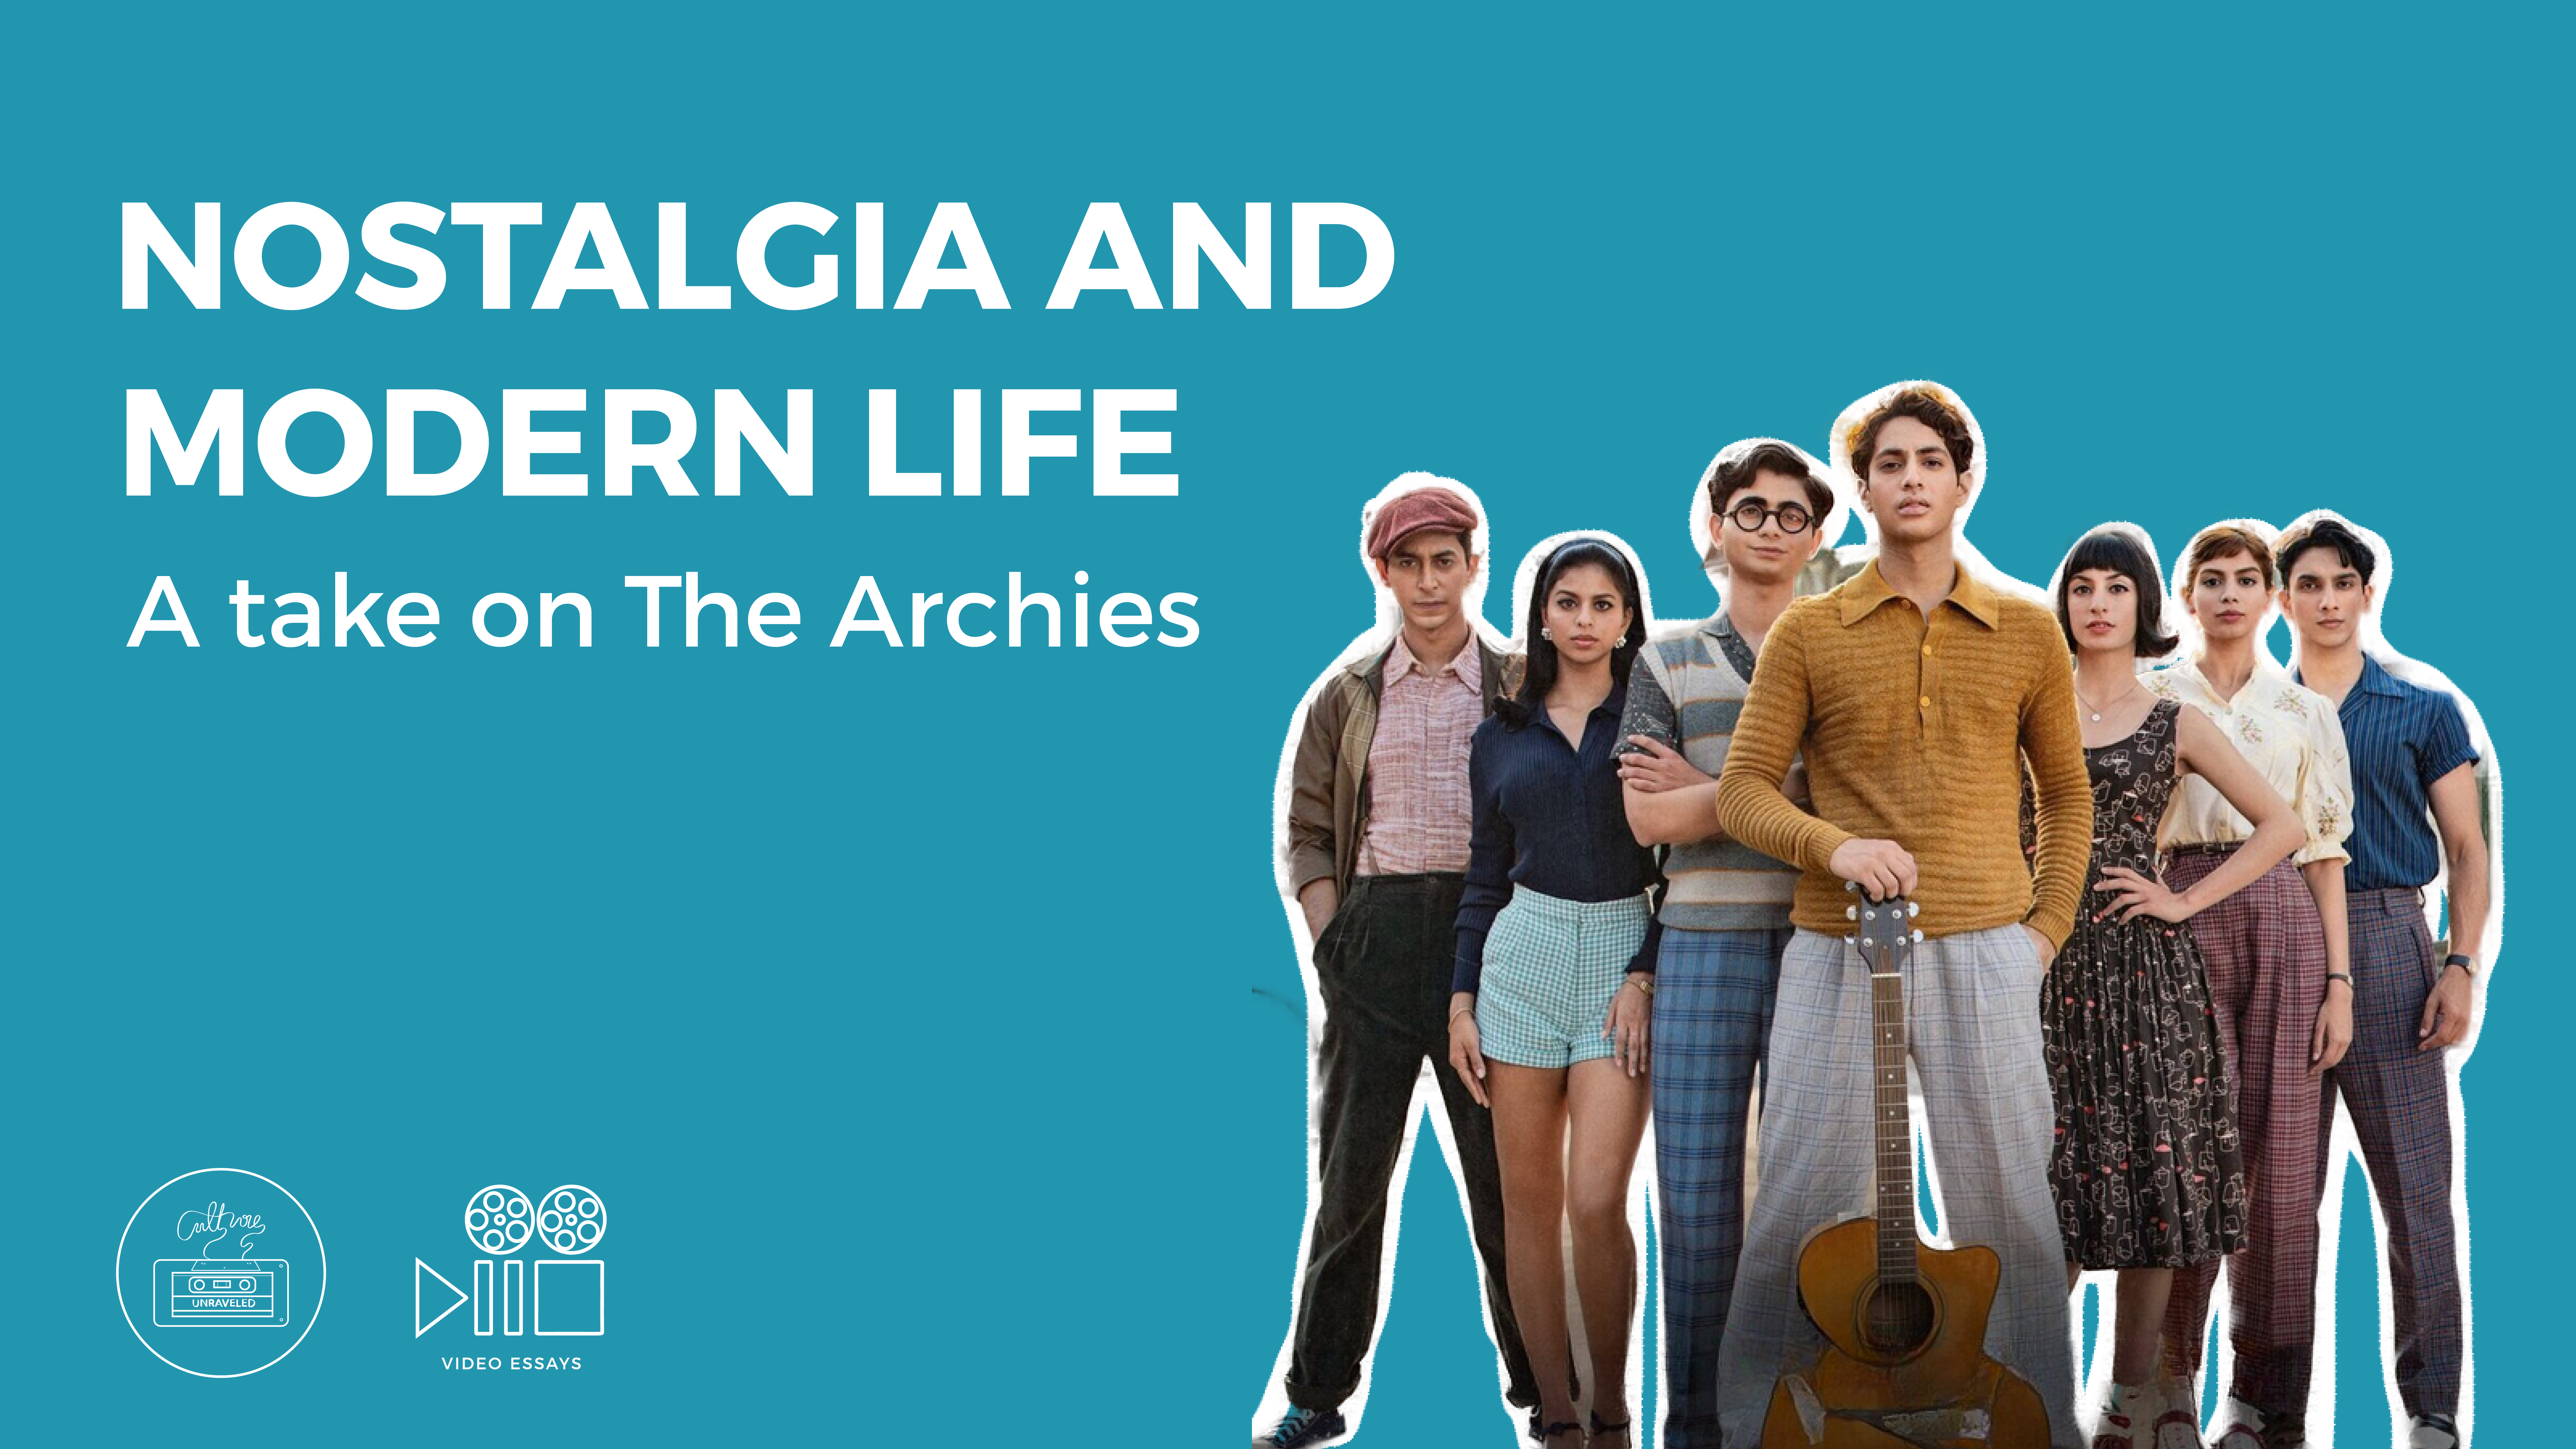 Nostalgia and Modern Life. A Take on The Archies